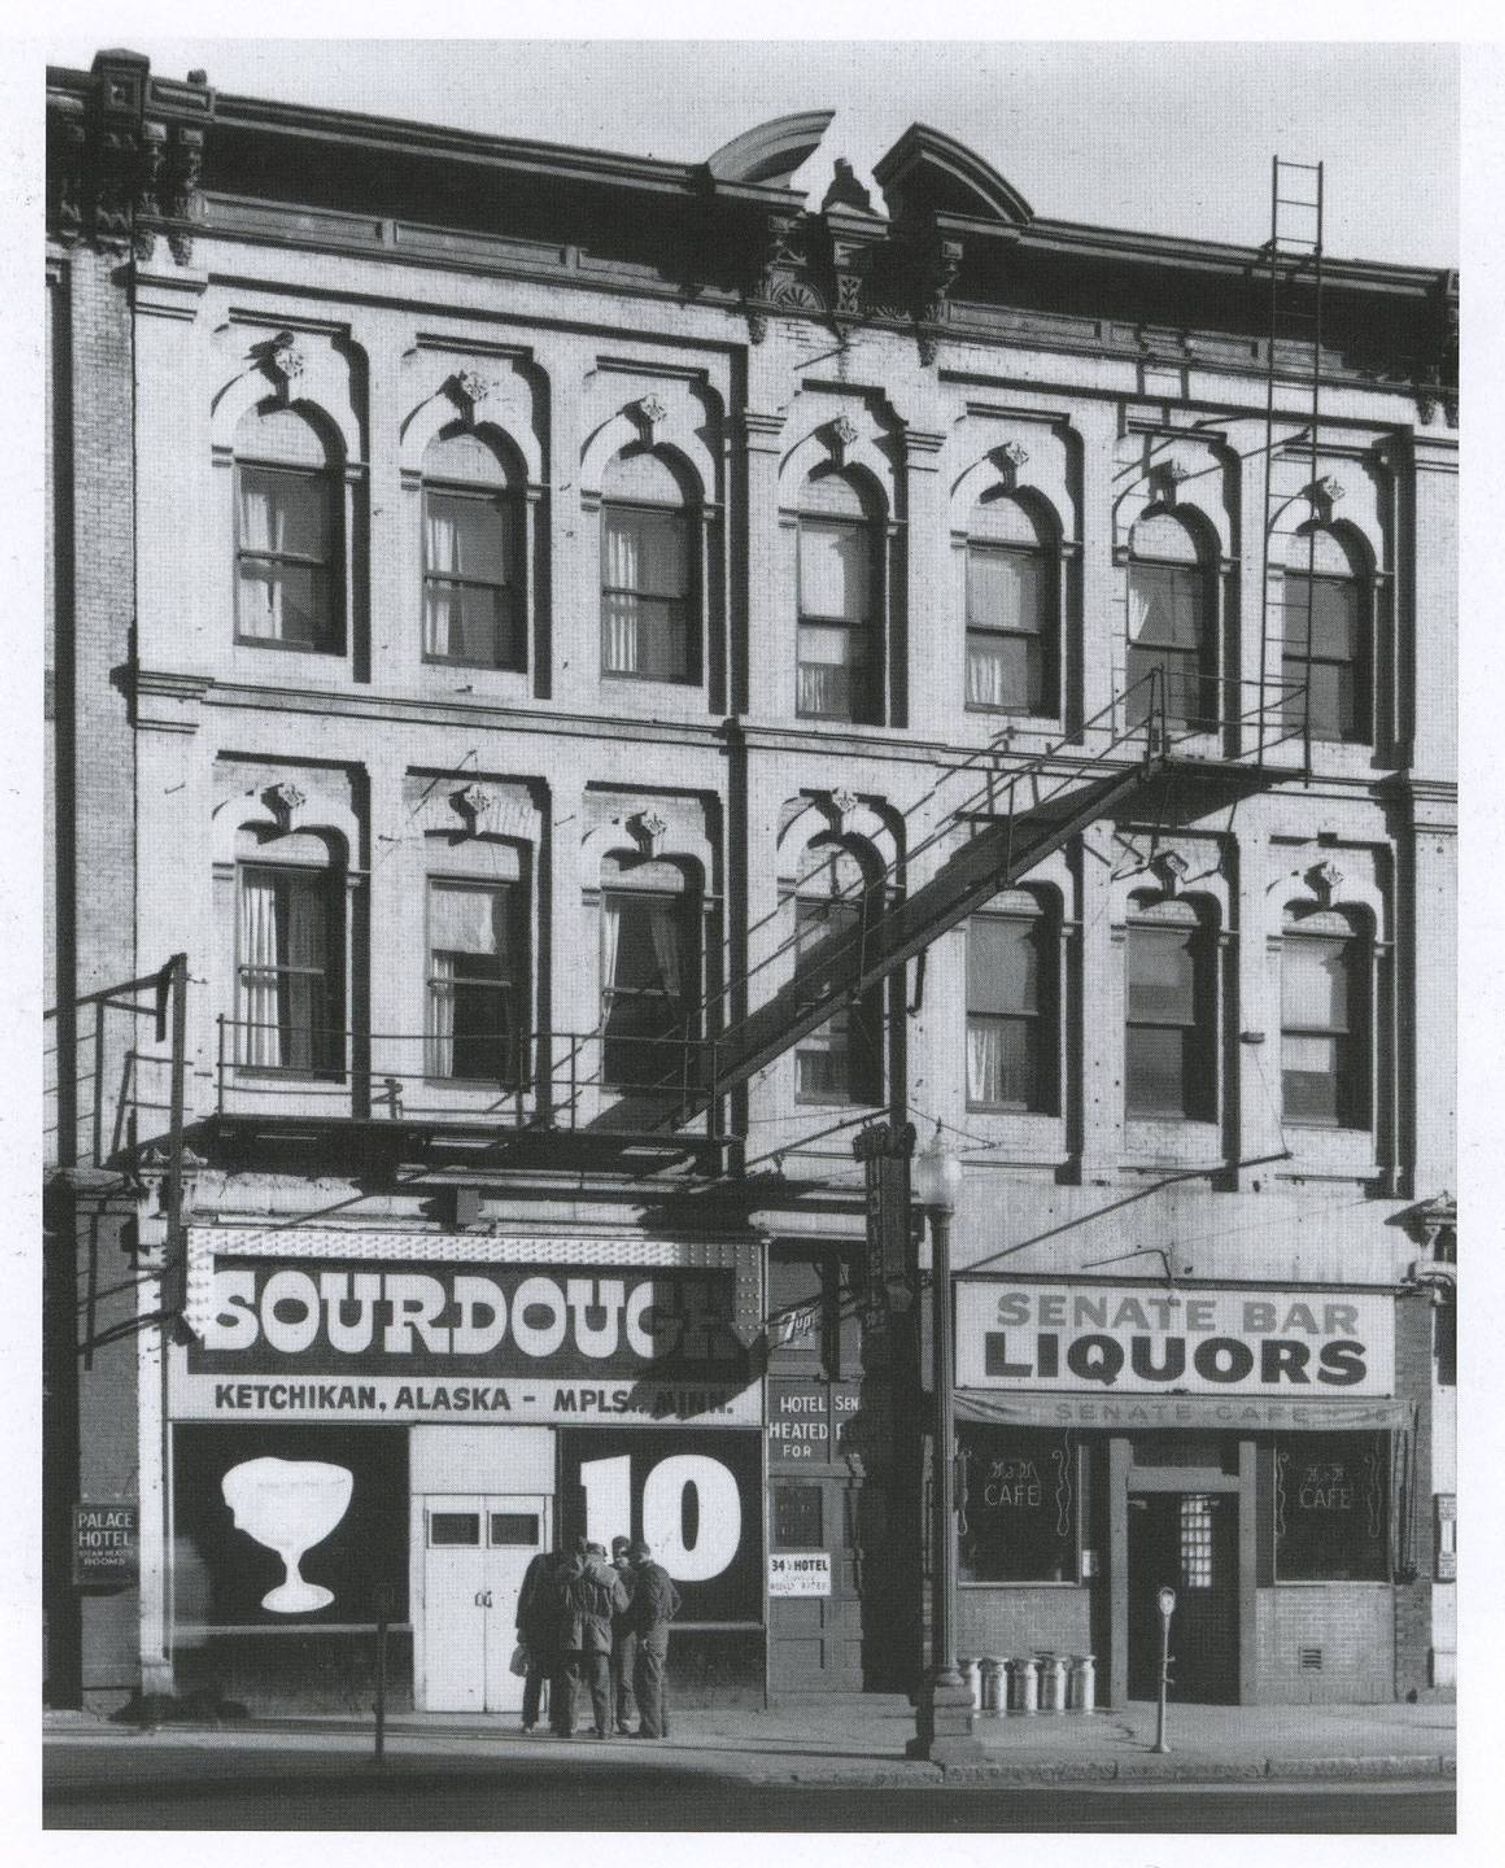 Photo of Johnny Rex’s Sourdough Bar by Robert Wilcox, courtesy of Hennepin County Library.